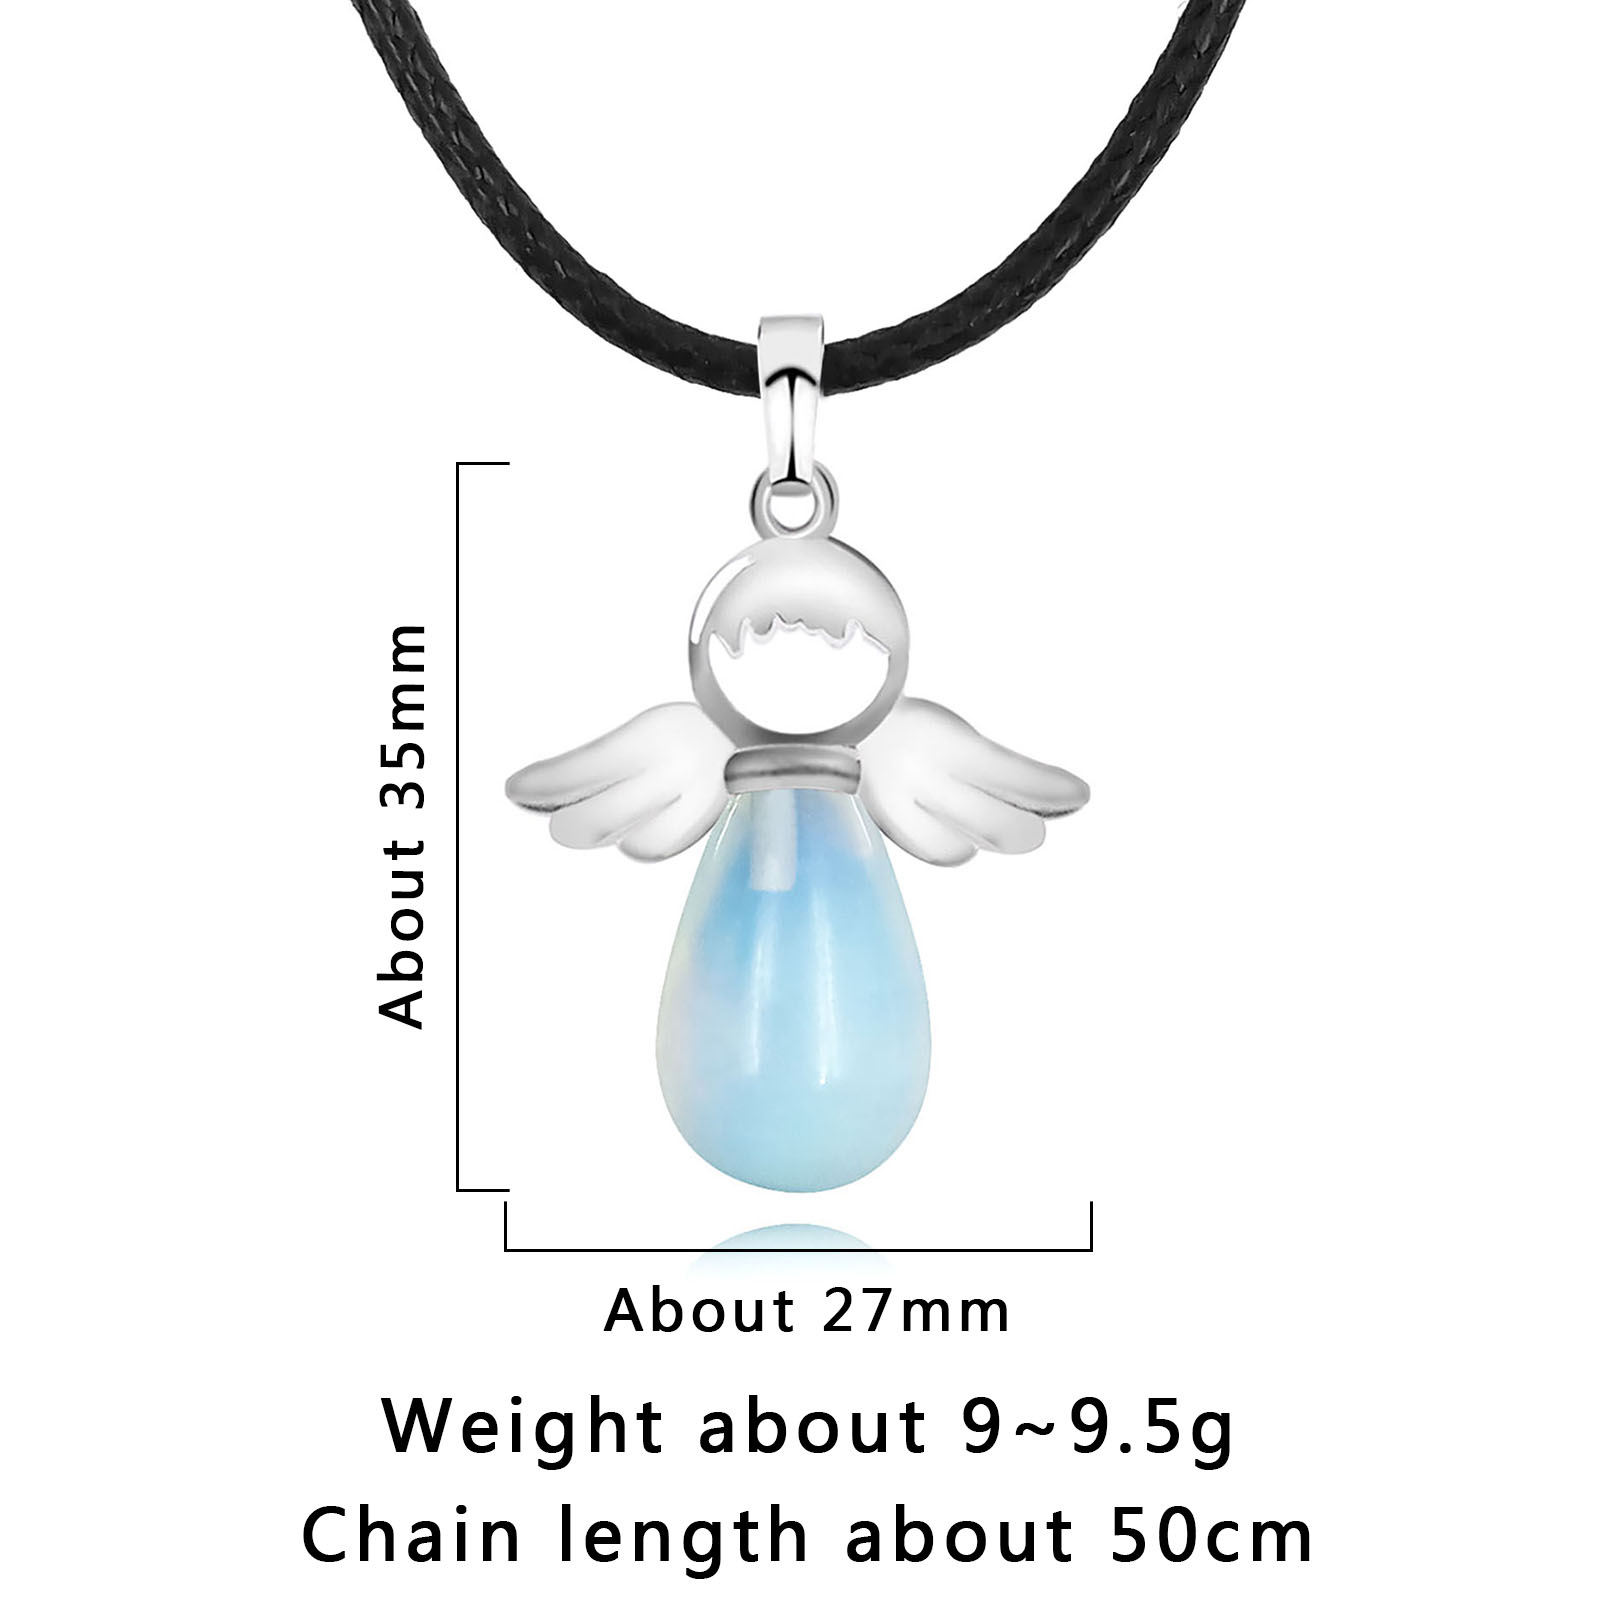 1:Pendant length is about 27mm, height is about 35mm, chain length is about 50cm